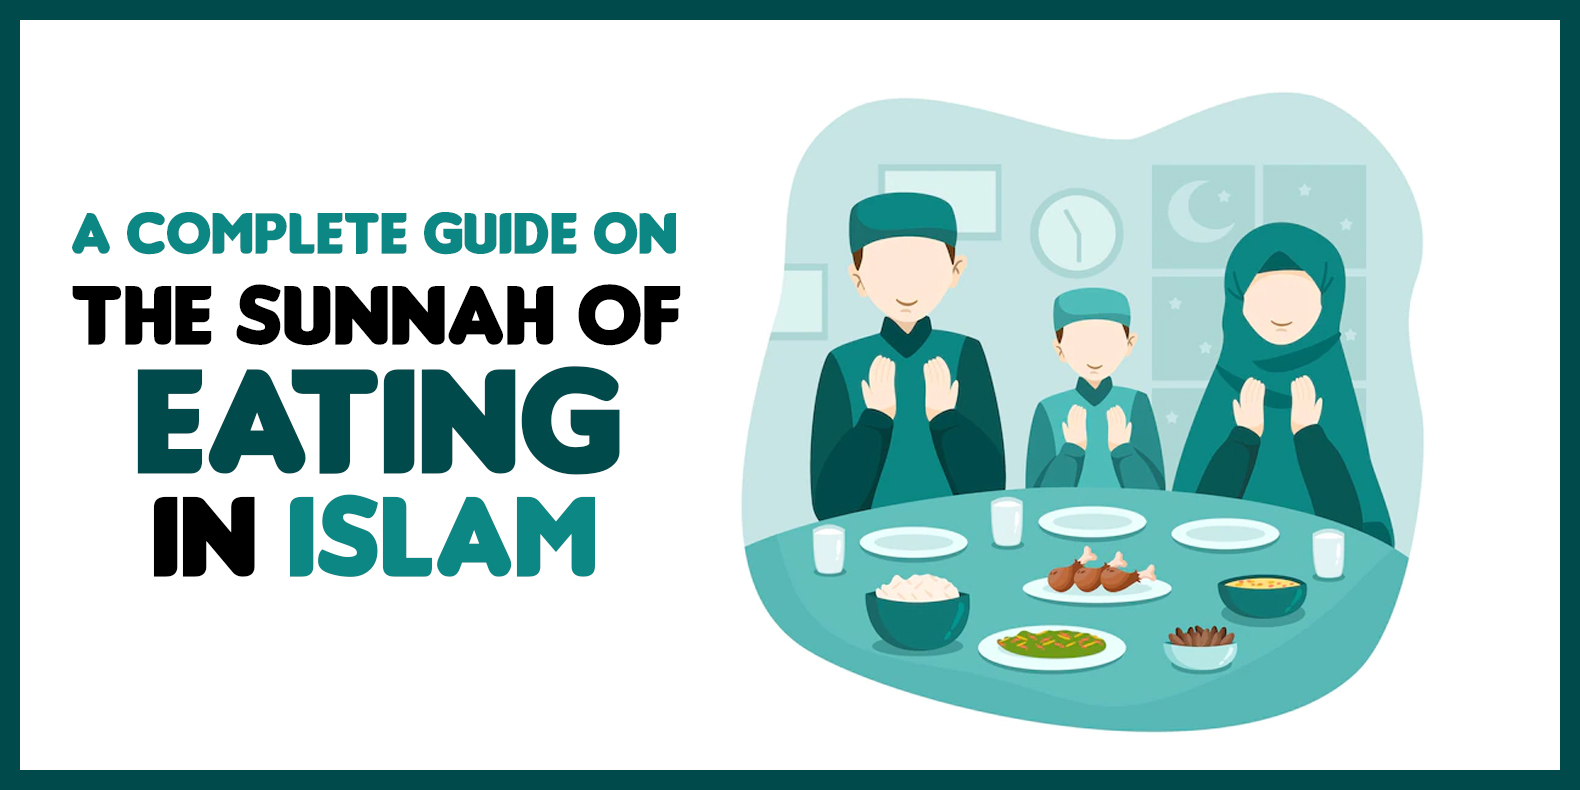 The Sunnah of Eating in Islam – A Complete Guide to Follow